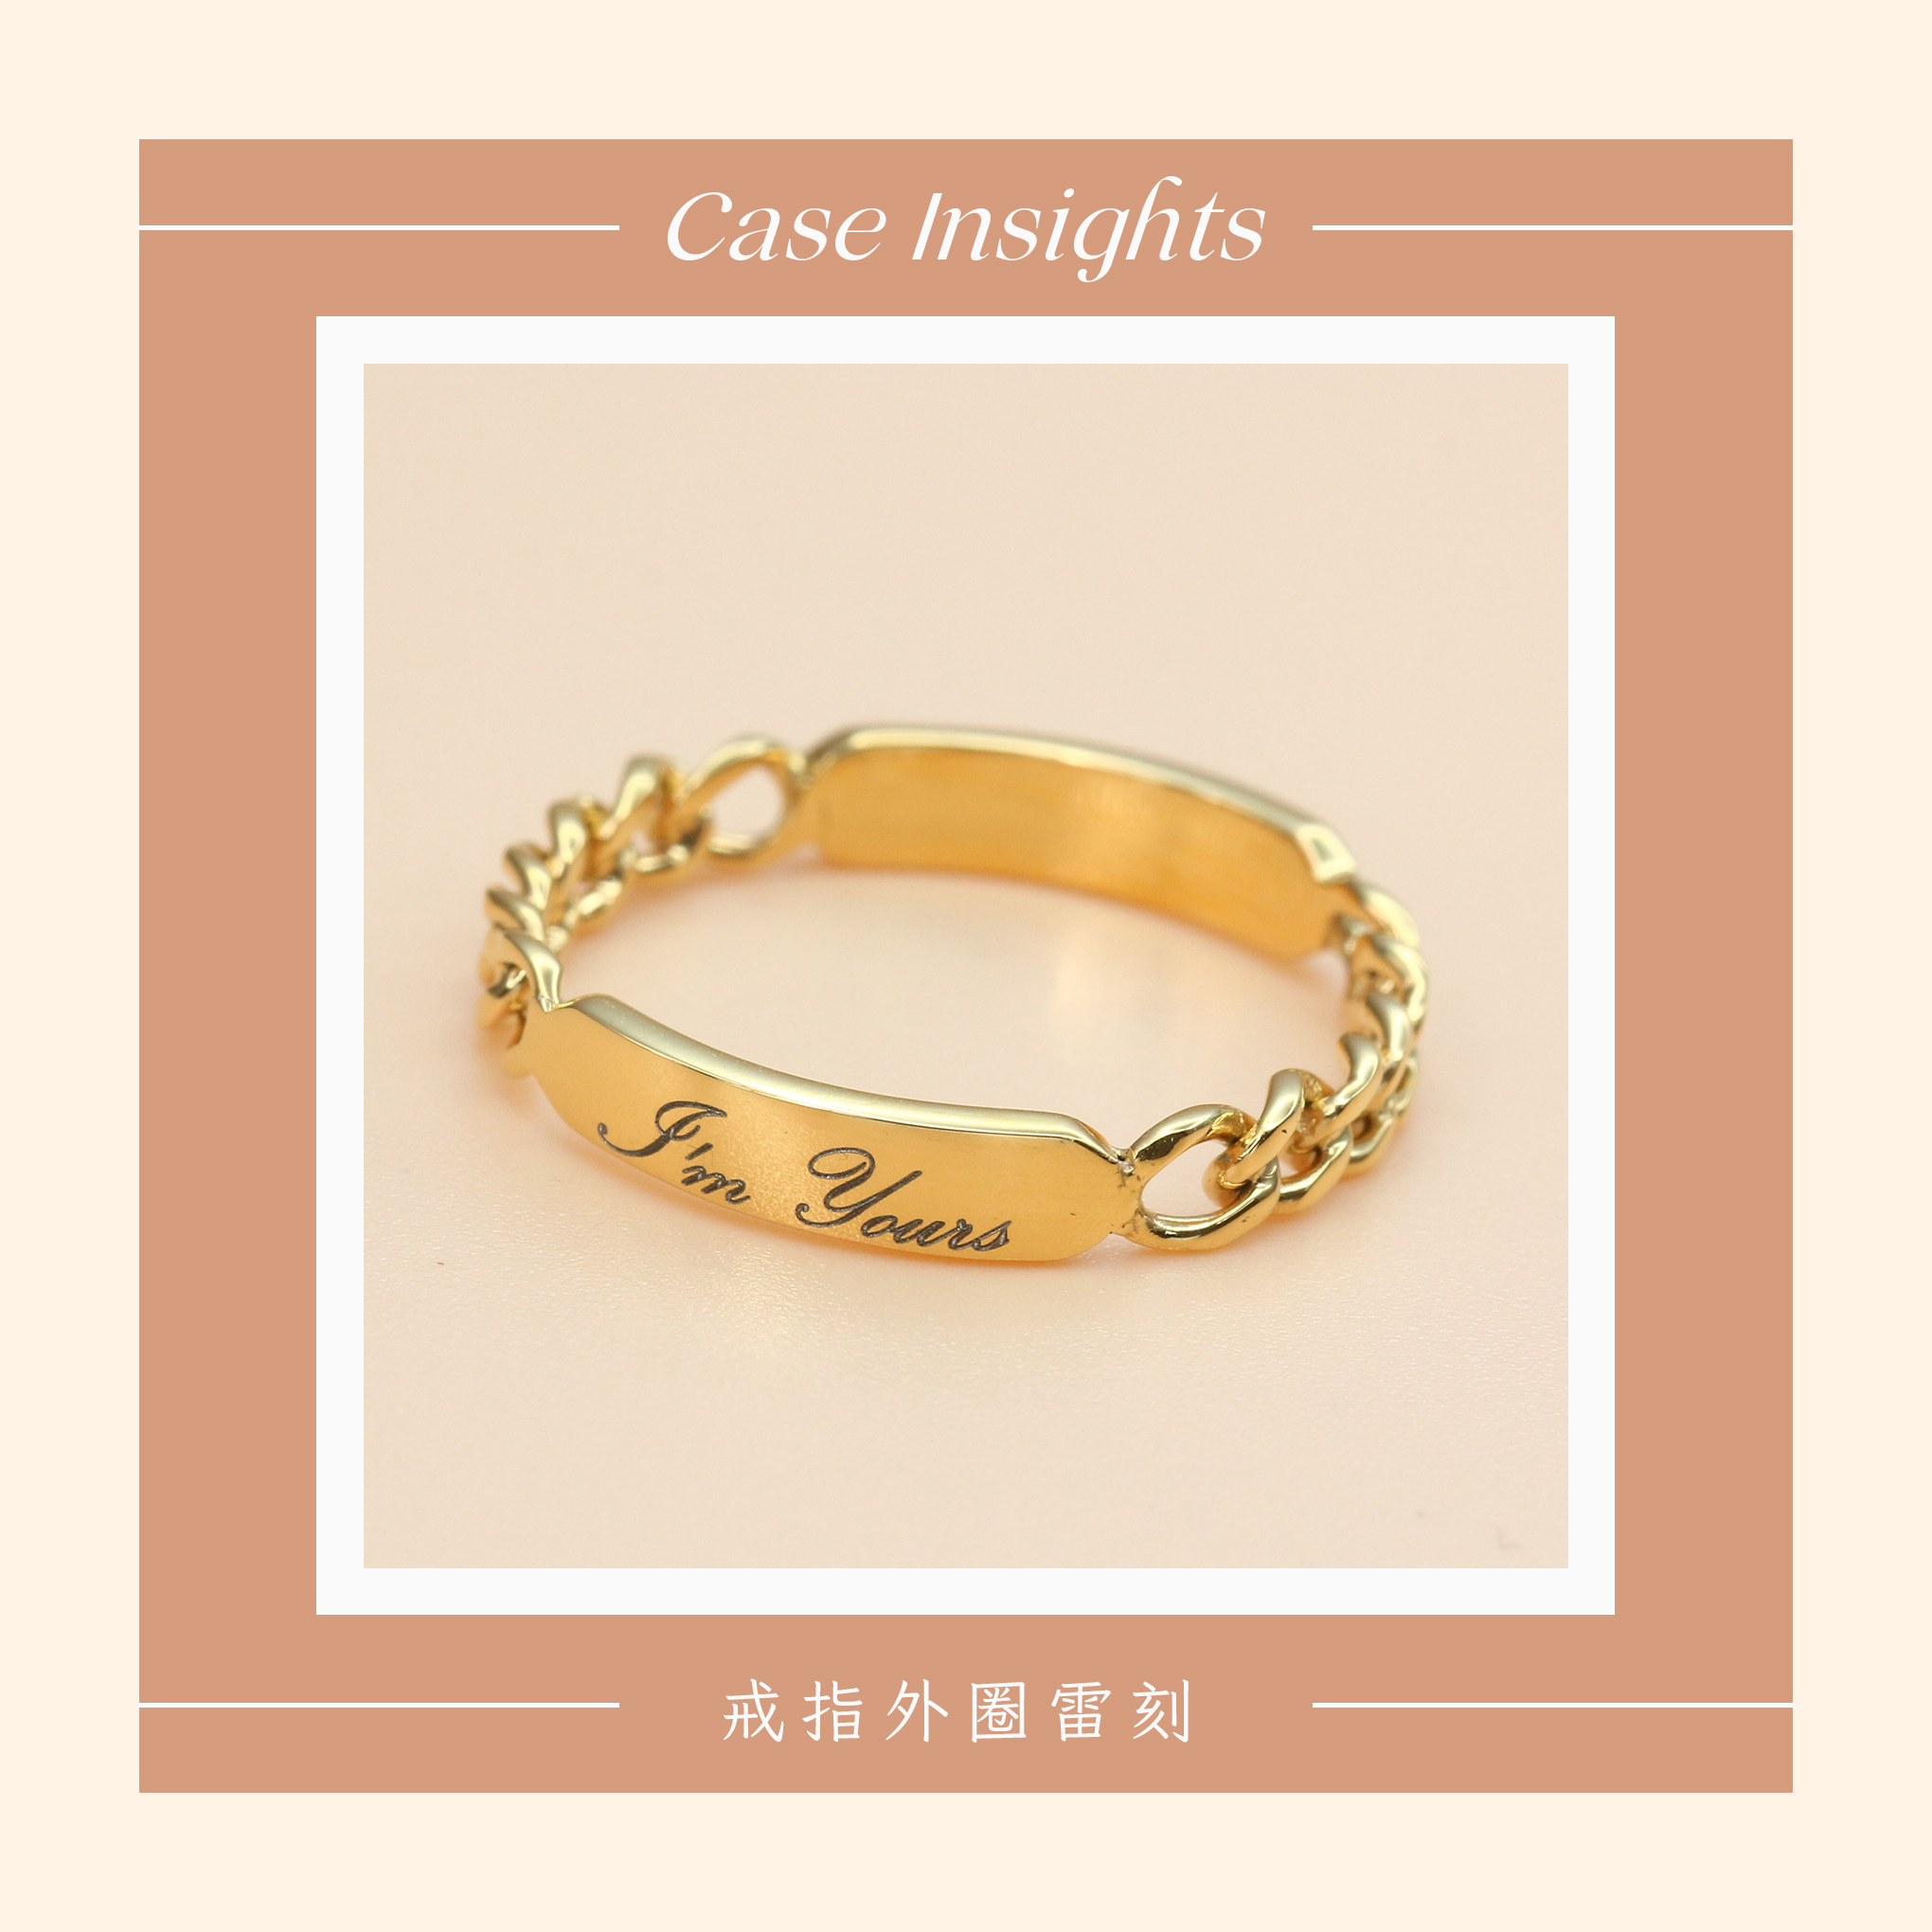 Case insights 02